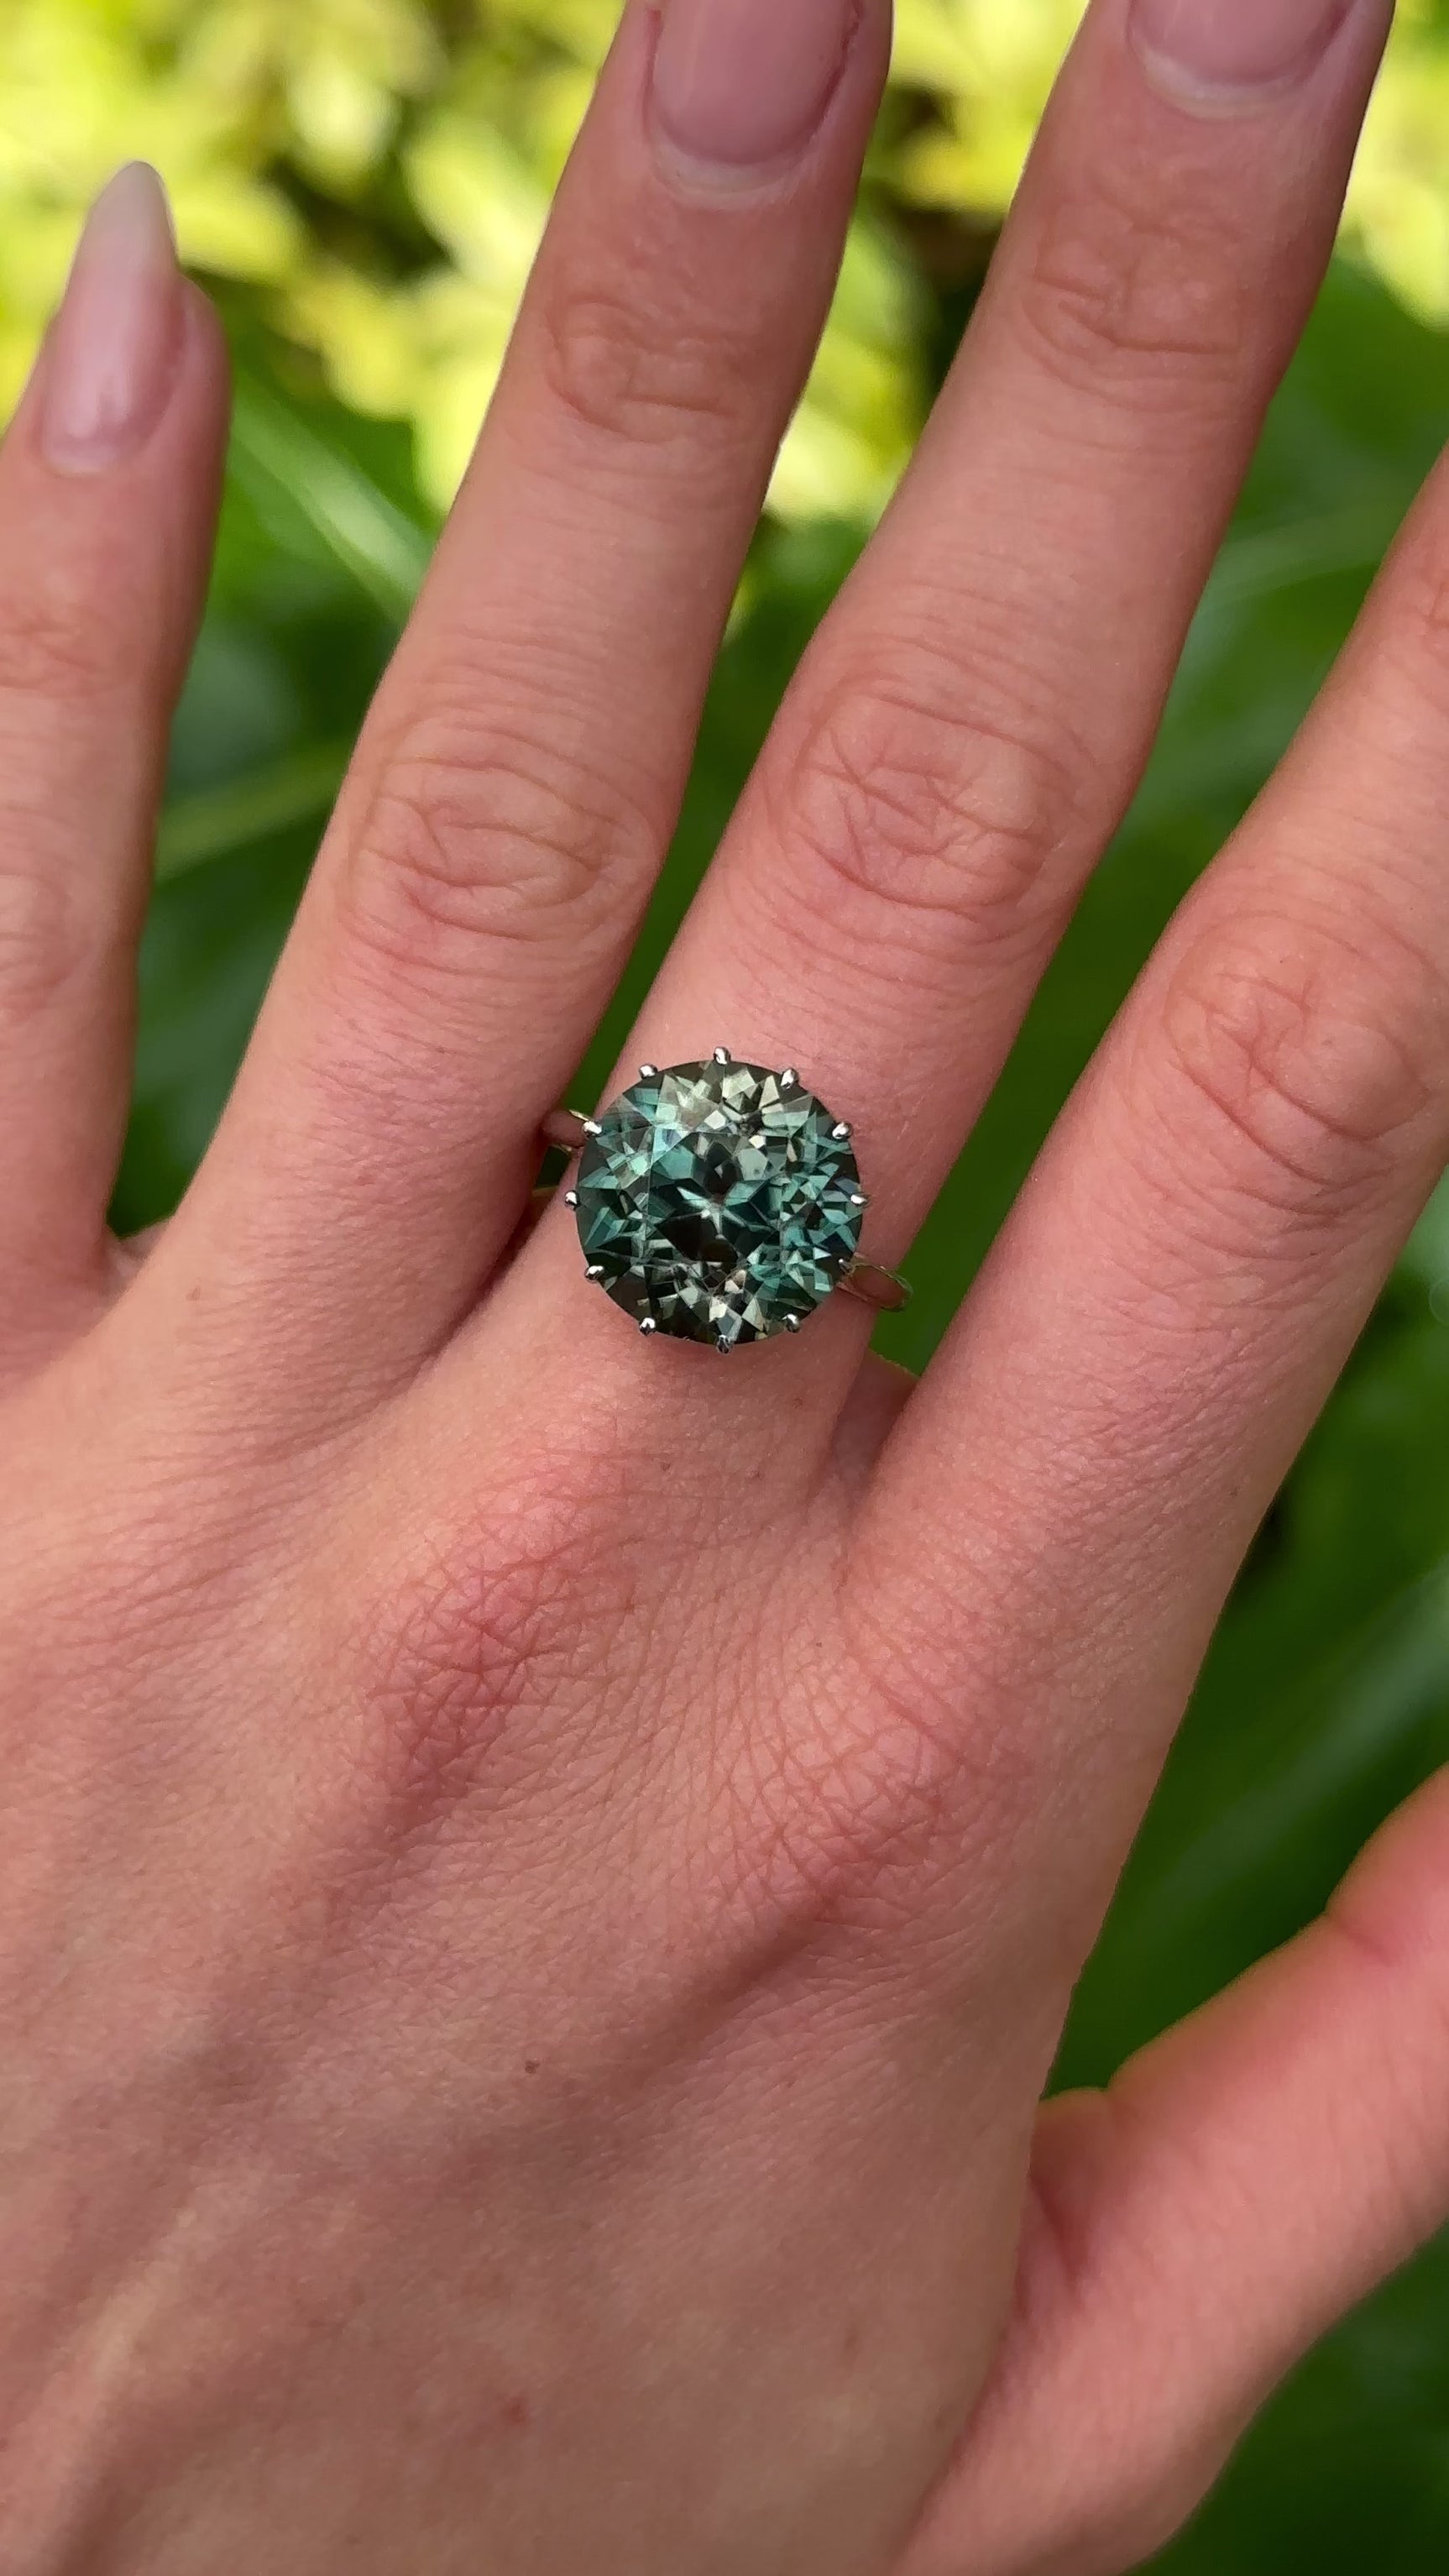 Vintage, Blue Zircon and Diamond Cocktail Ring, 18ct White Gold worn on hand.